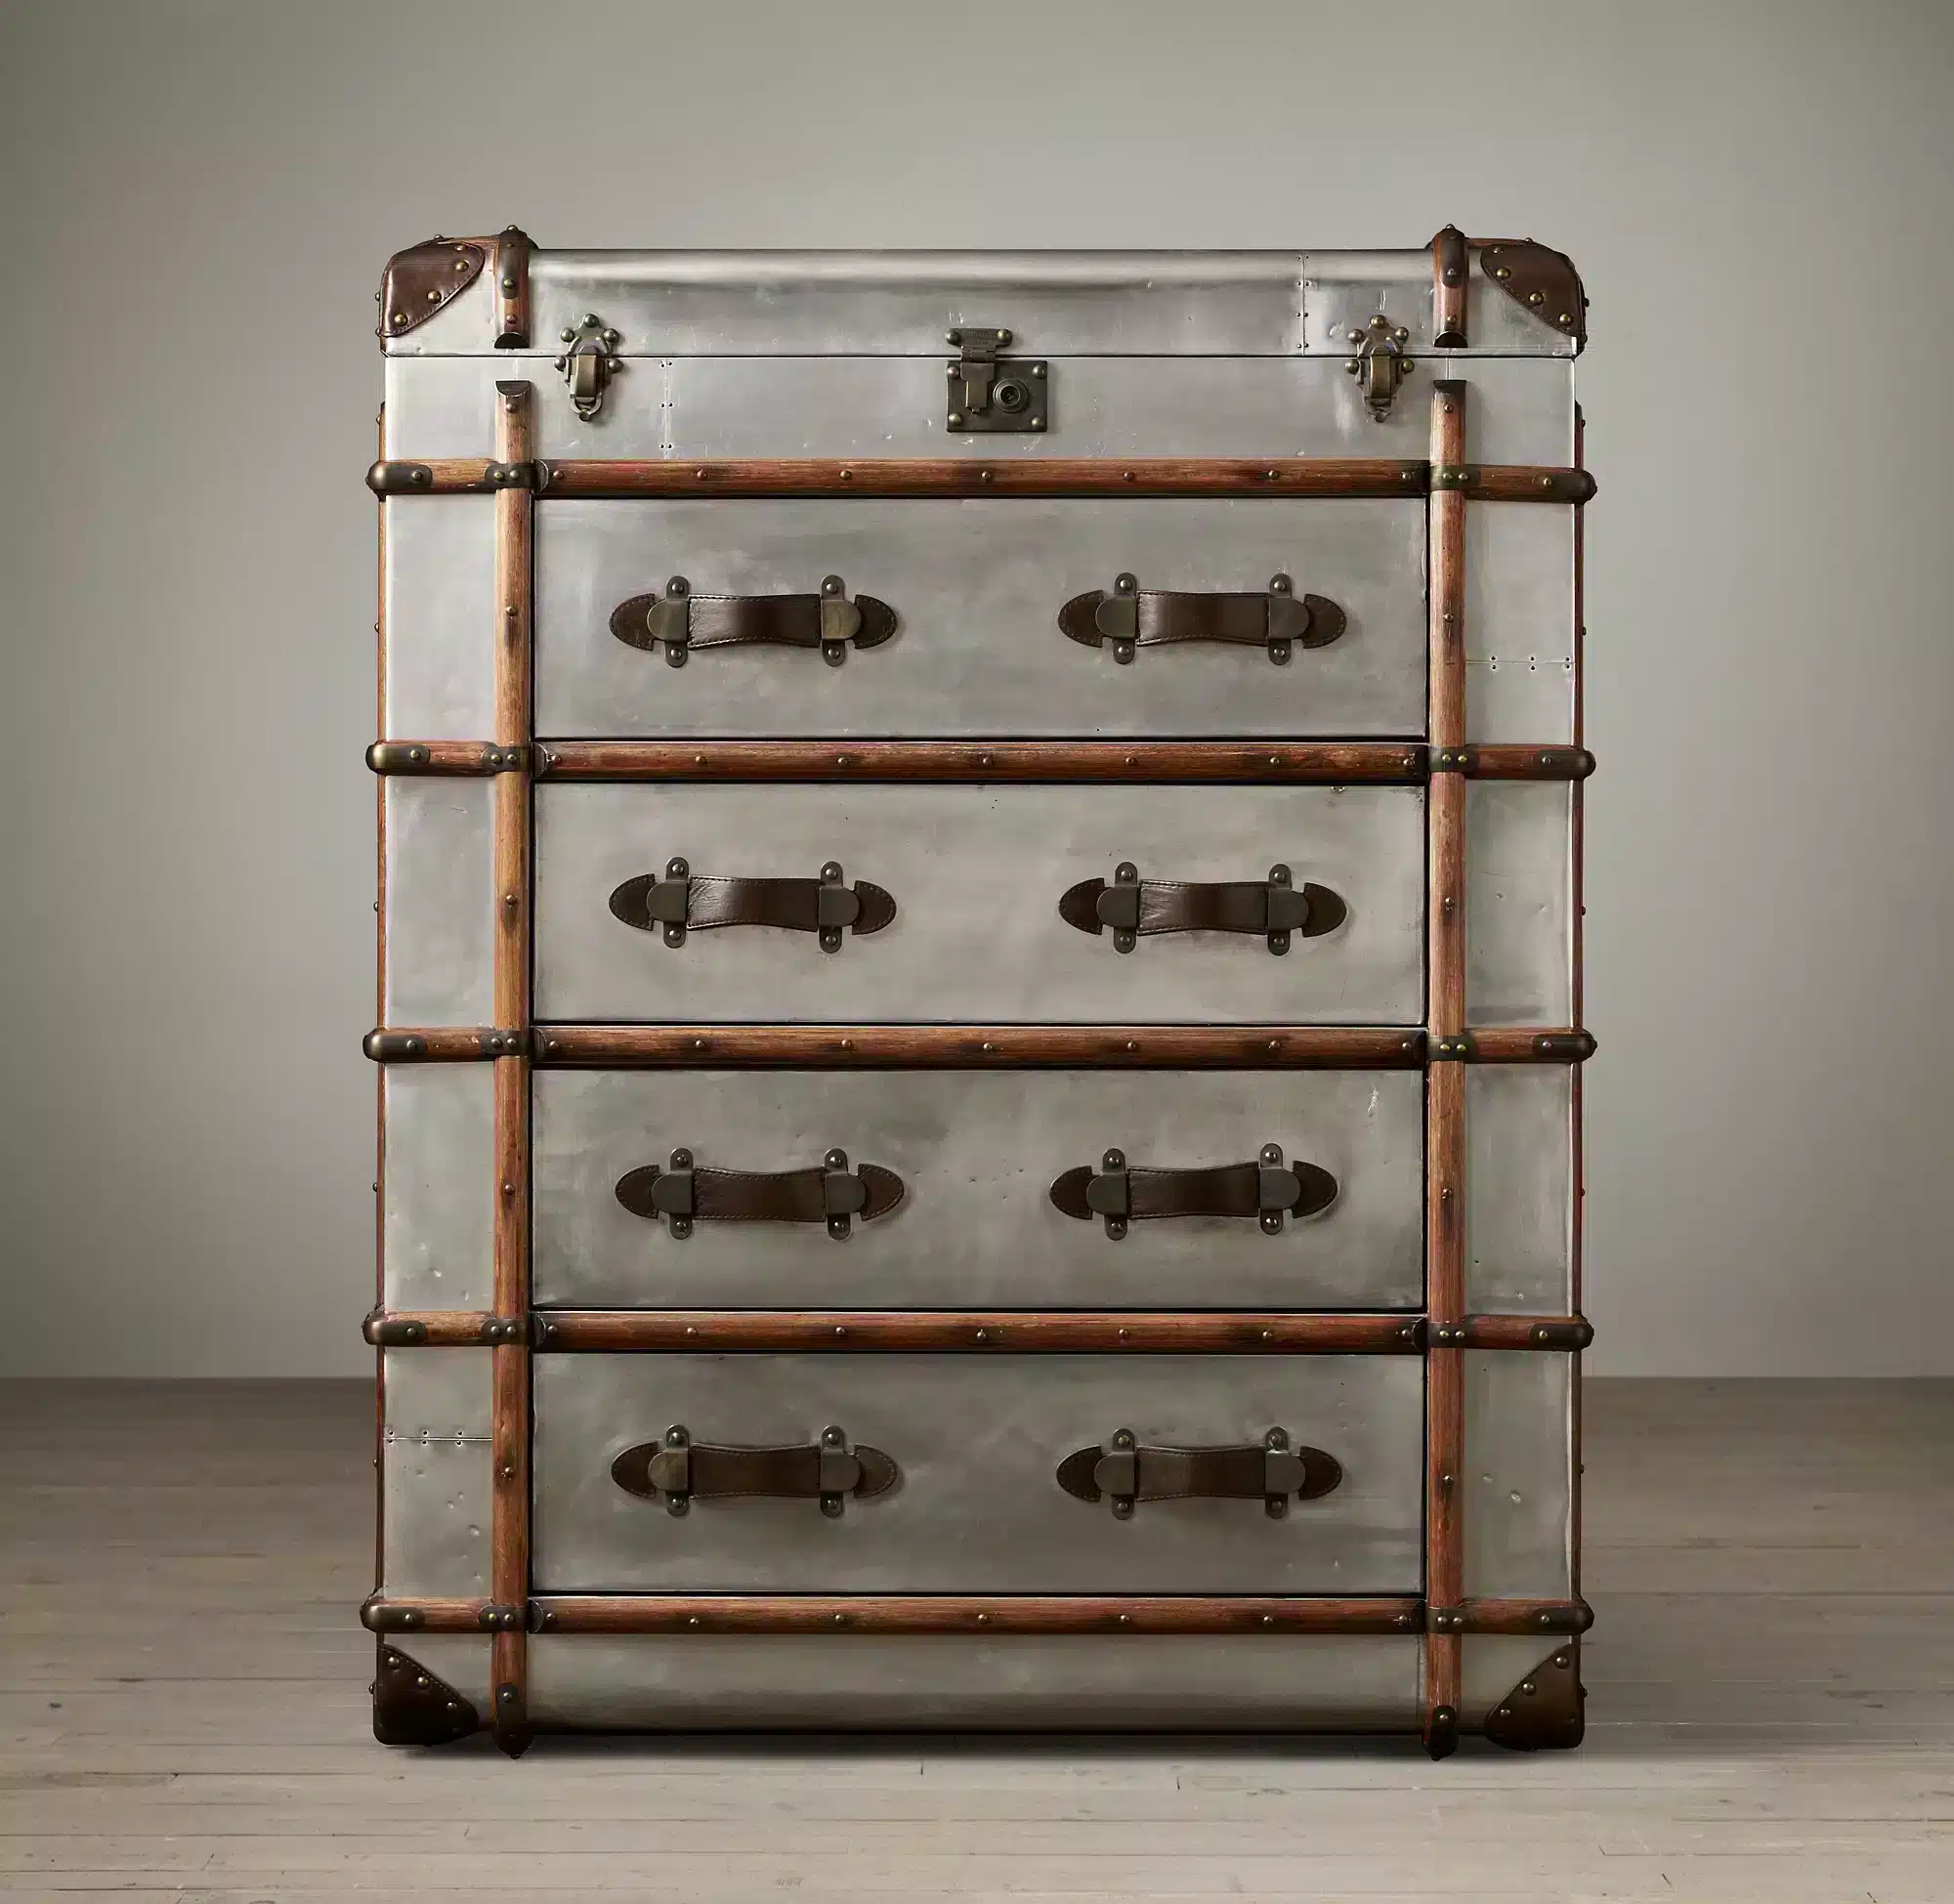 The Richard Trunk chest large is inspired by a worn, custom-made steamer Trunk.